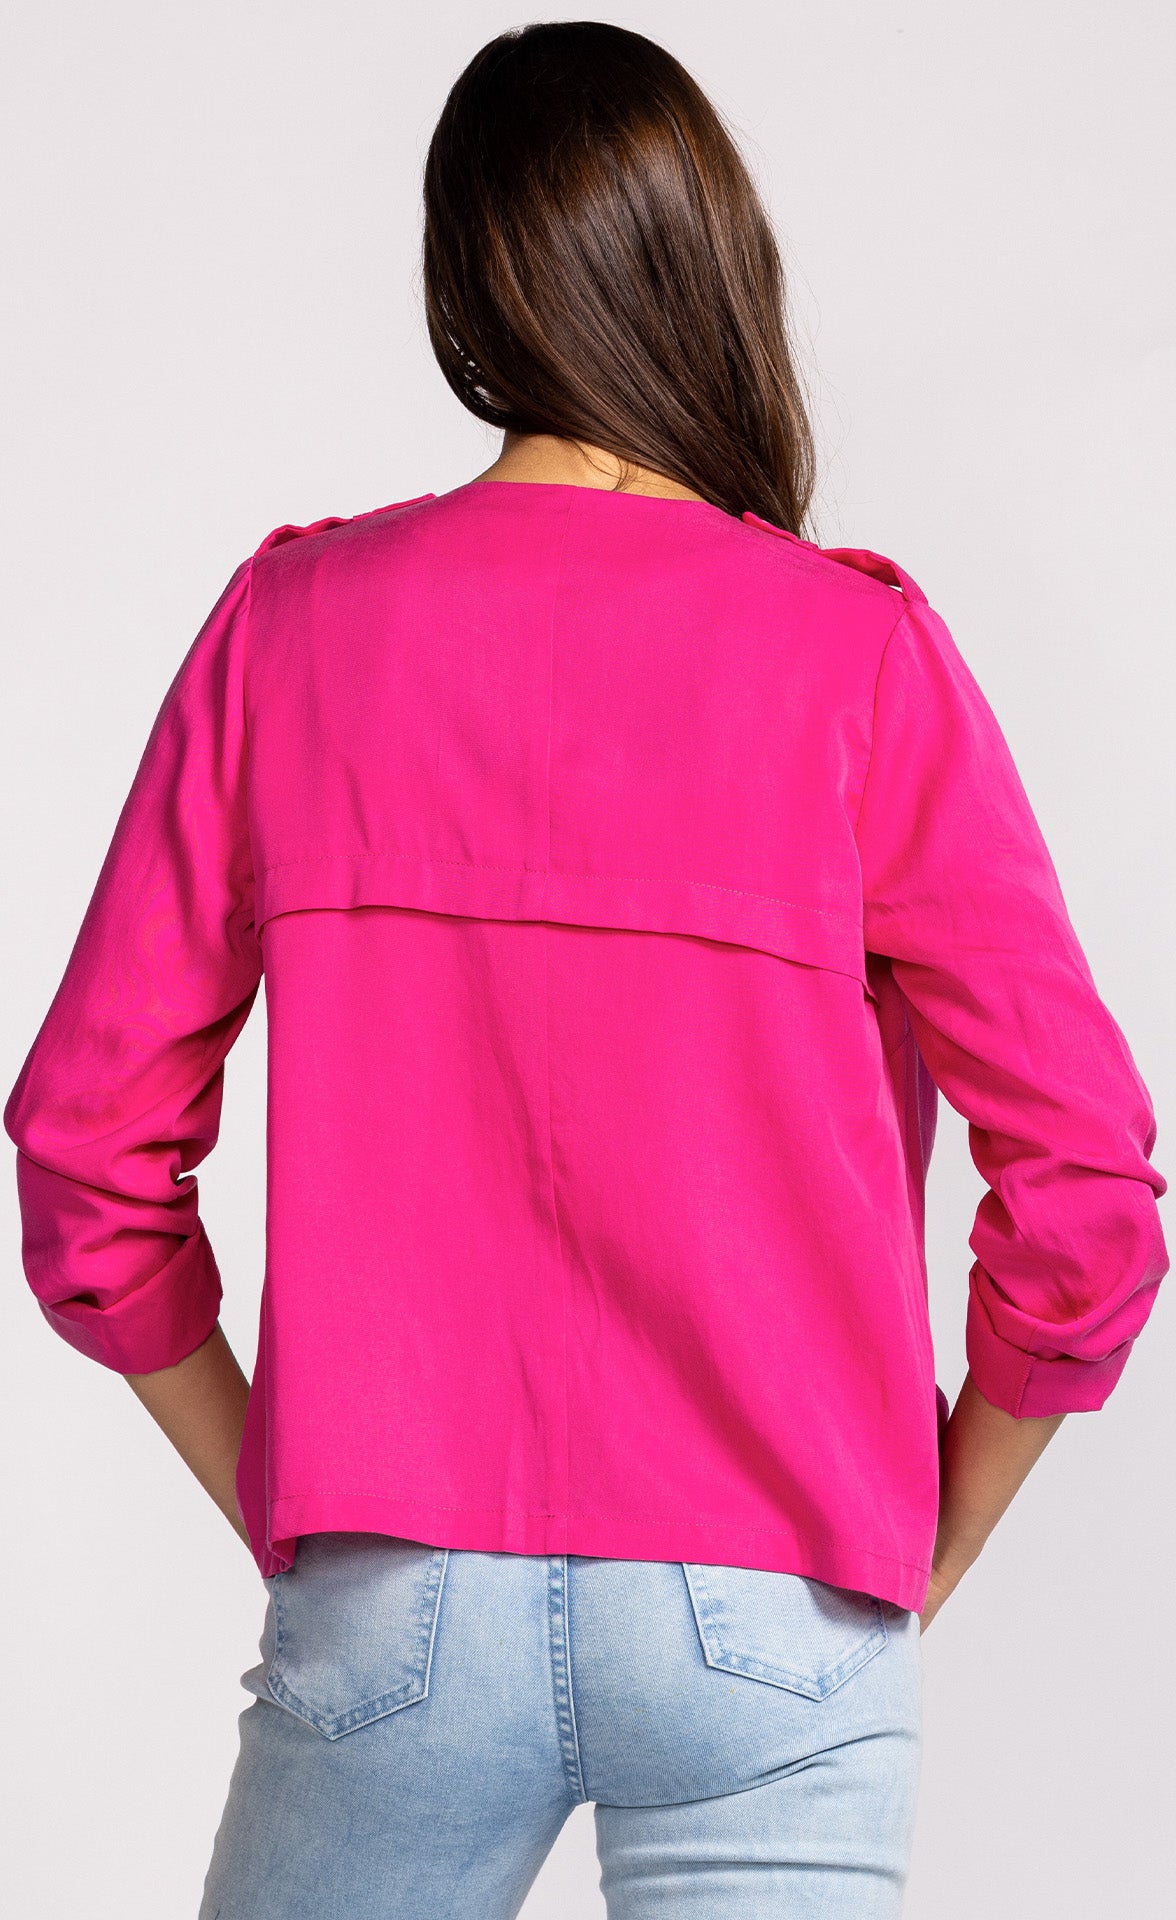 Melody Jacket Pink - Pink Martini Collection